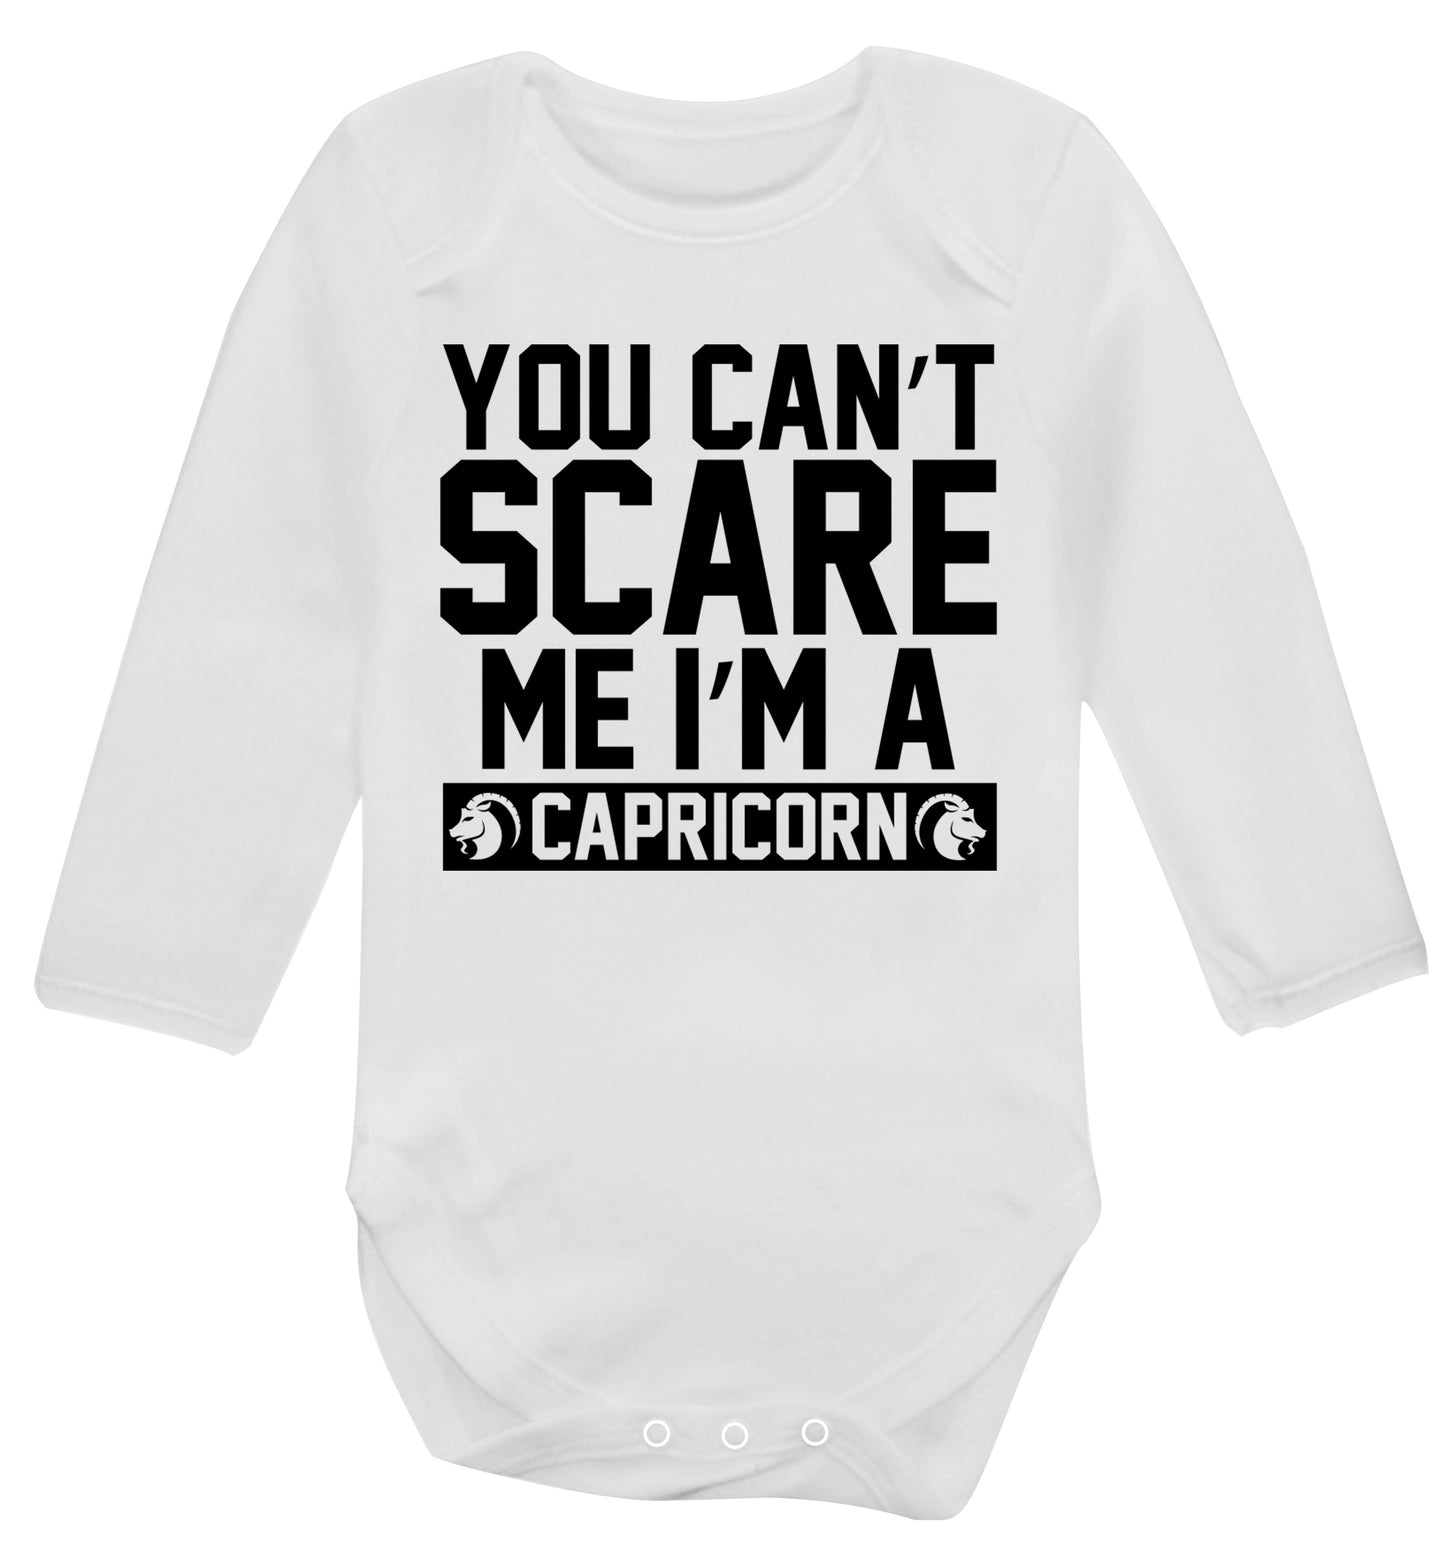 You can't scare me I'm a capricorn Baby Vest long sleeved white 6-12 months